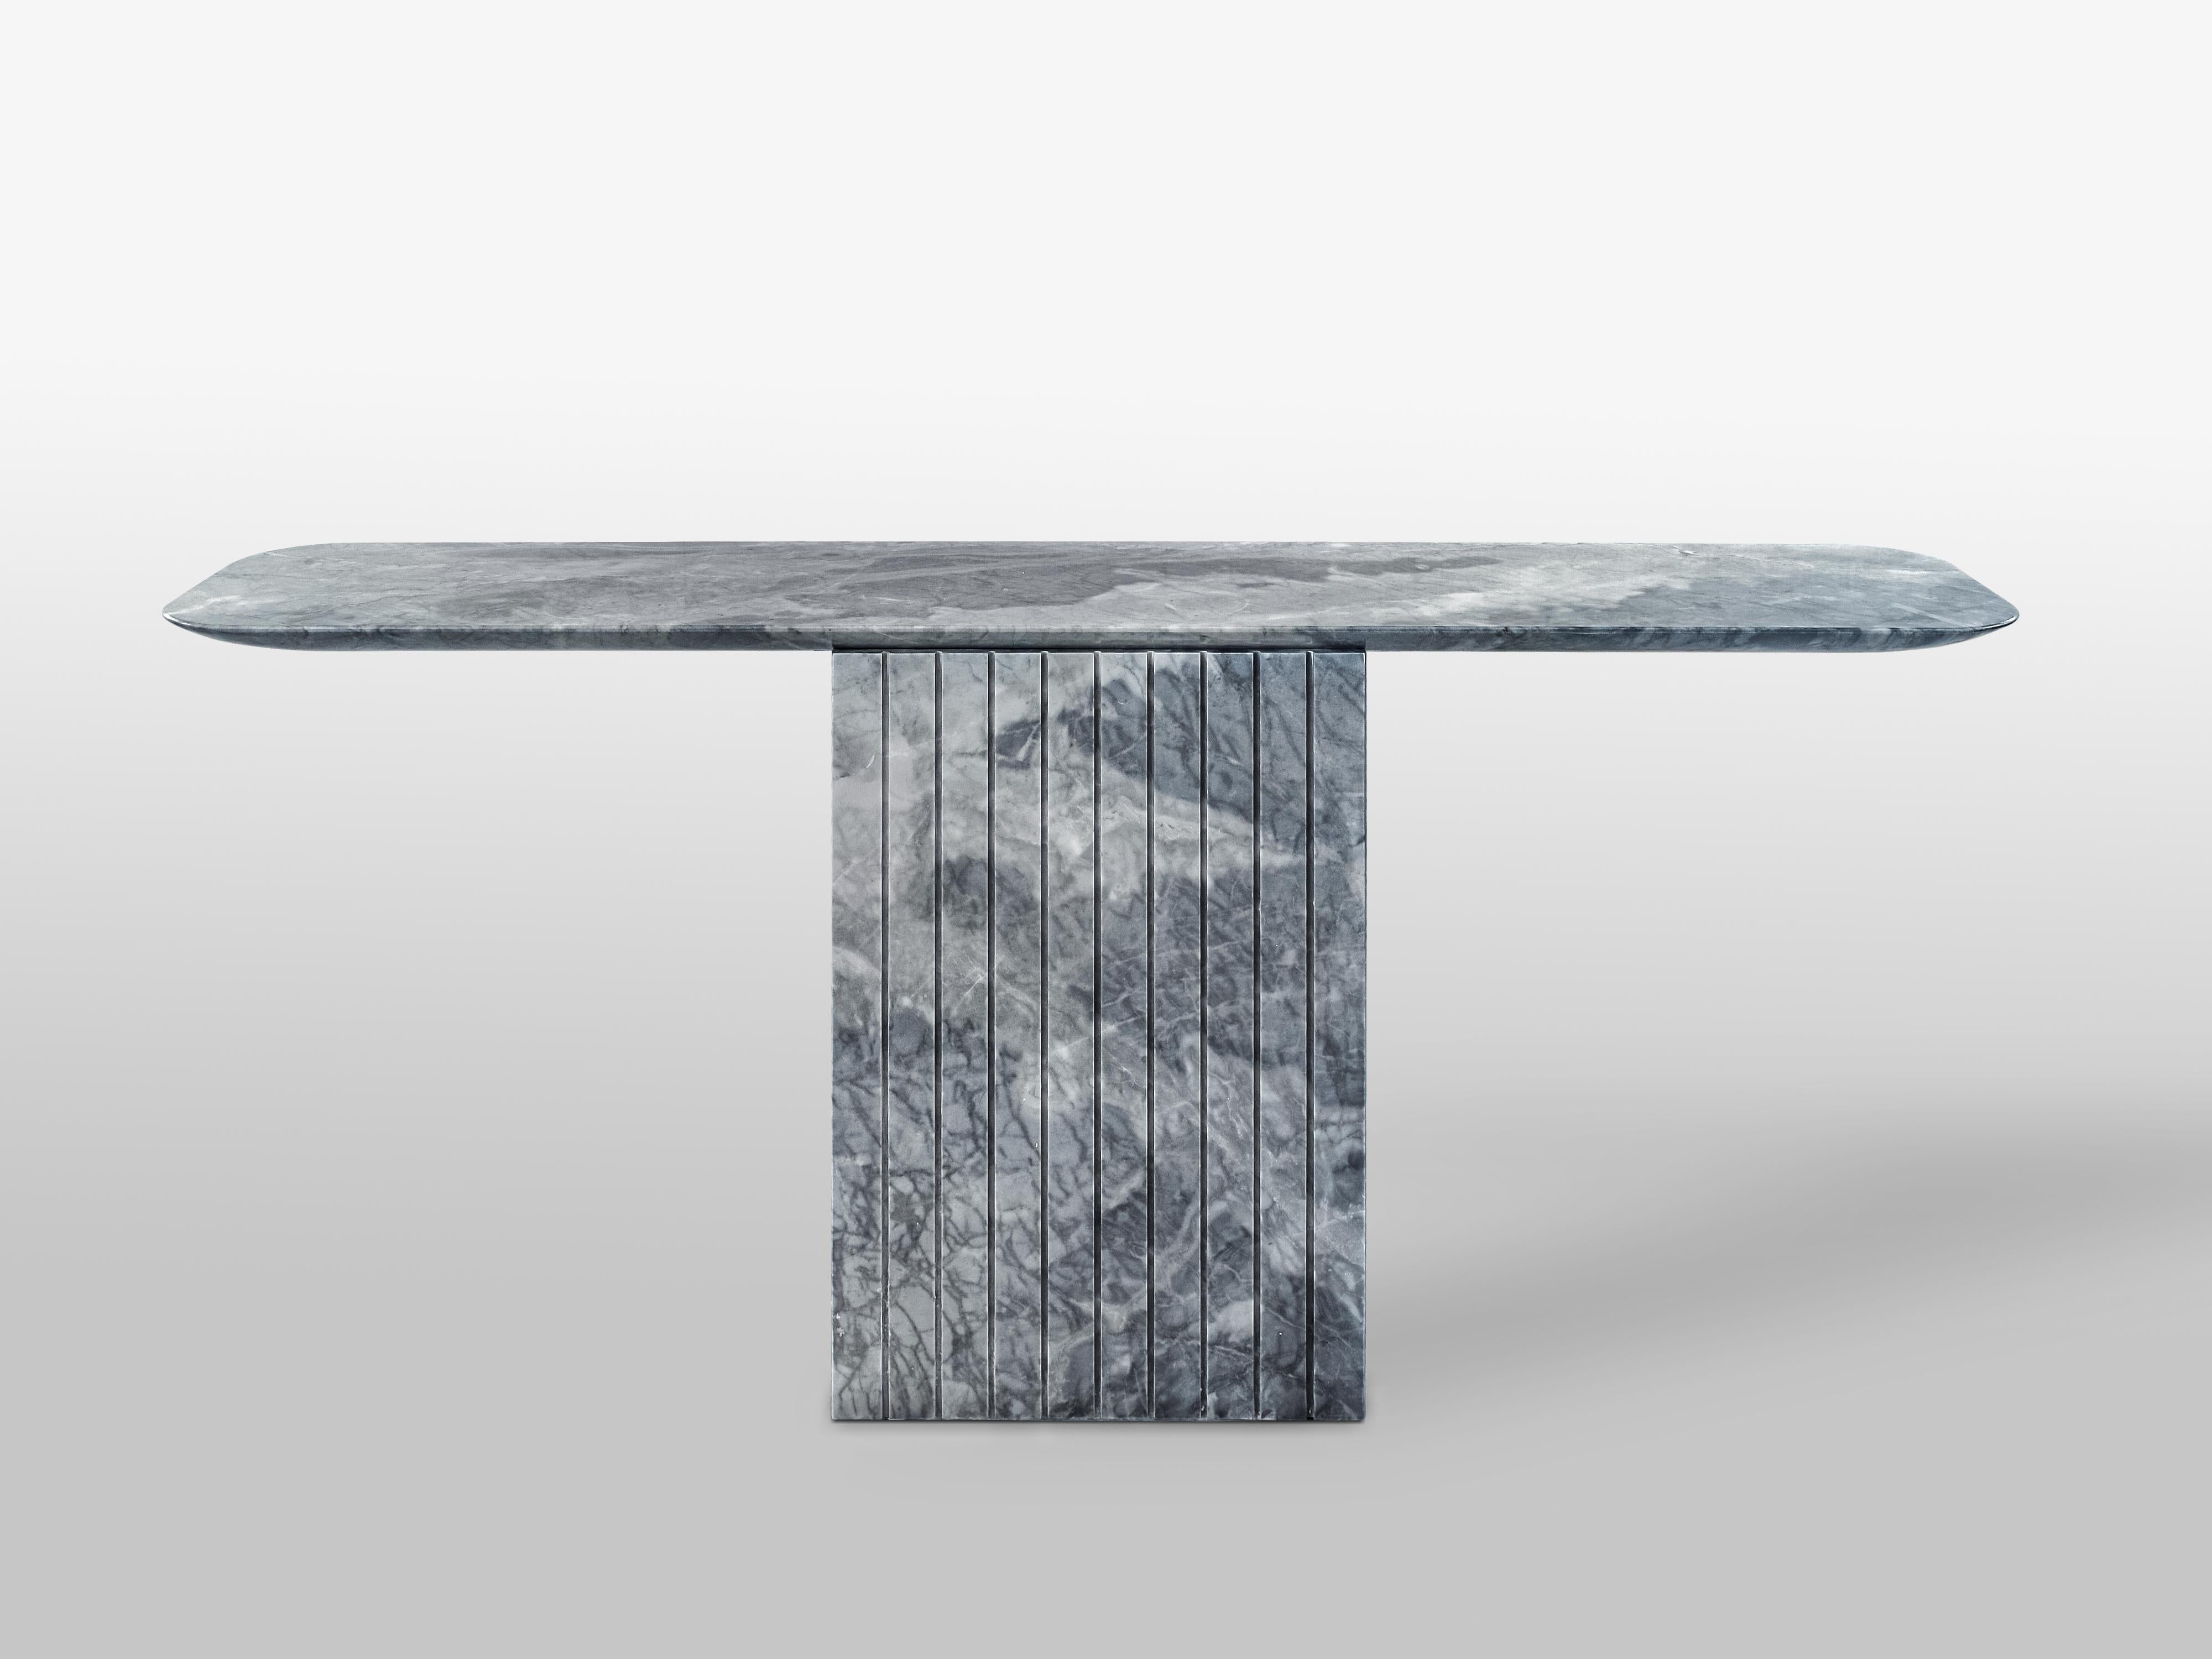 Altar Apuan Clouds Stone Console by Etamorph
Dimensions: D 35 x W 170 x H 76 cm.
Materials: Apuan Clouds Stone

Available in different stone options. Please contact us. 

ETAMORPH is a NYC-based design boutique studio specializing in contemporary